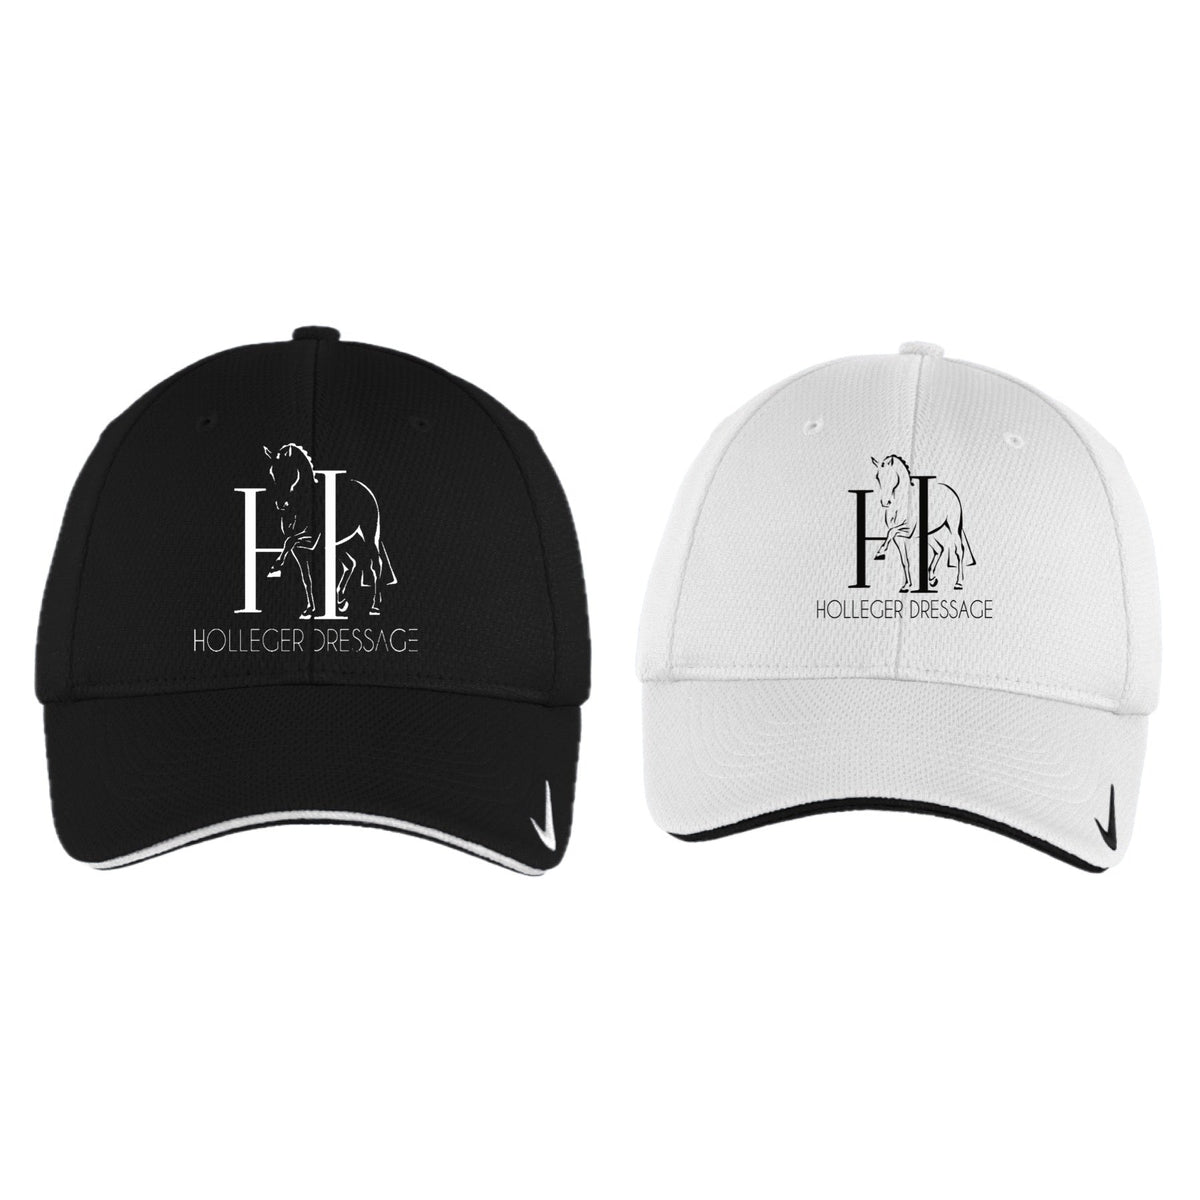 Equestrian Team Apparel Holleger Dressage Baseball caps equestrian team apparel online tack store mobile tack store custom farm apparel custom show stable clothing equestrian lifestyle horse show clothing riding clothes horses equestrian tack store